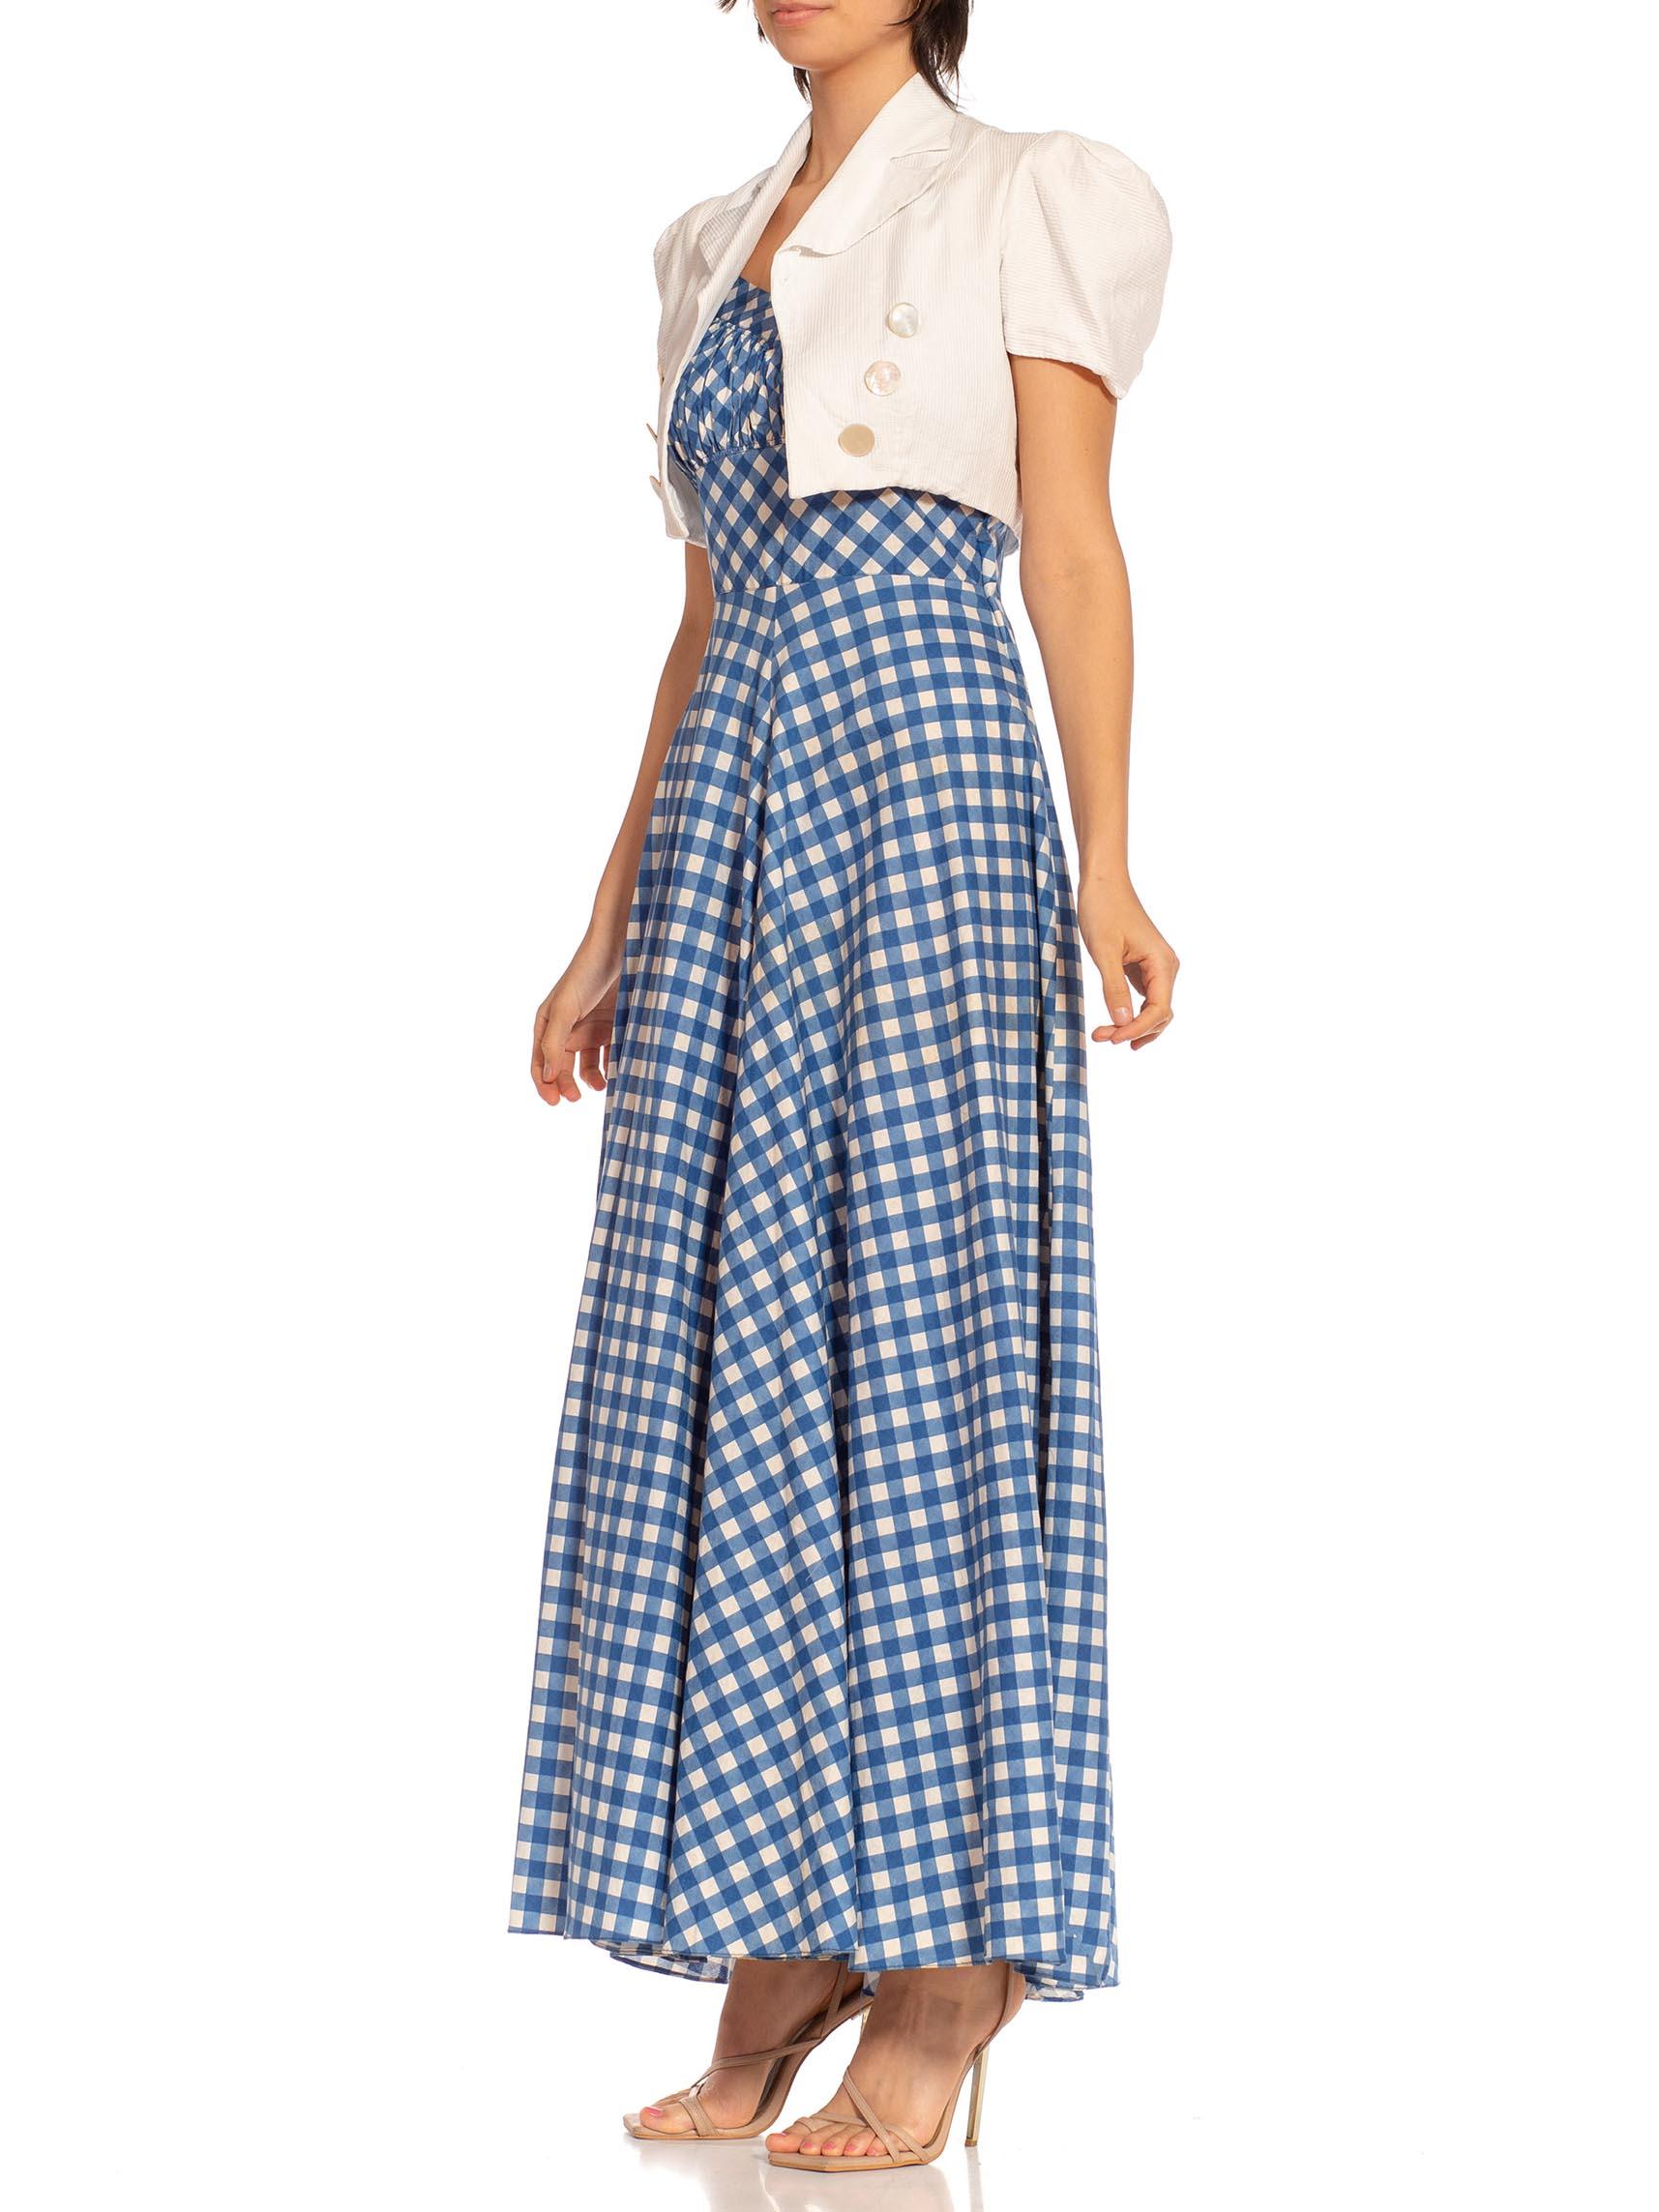 1930S White & Blue Cotton Gingham Full Skirt Dress With Matching Jacket Deadsto For Sale 2